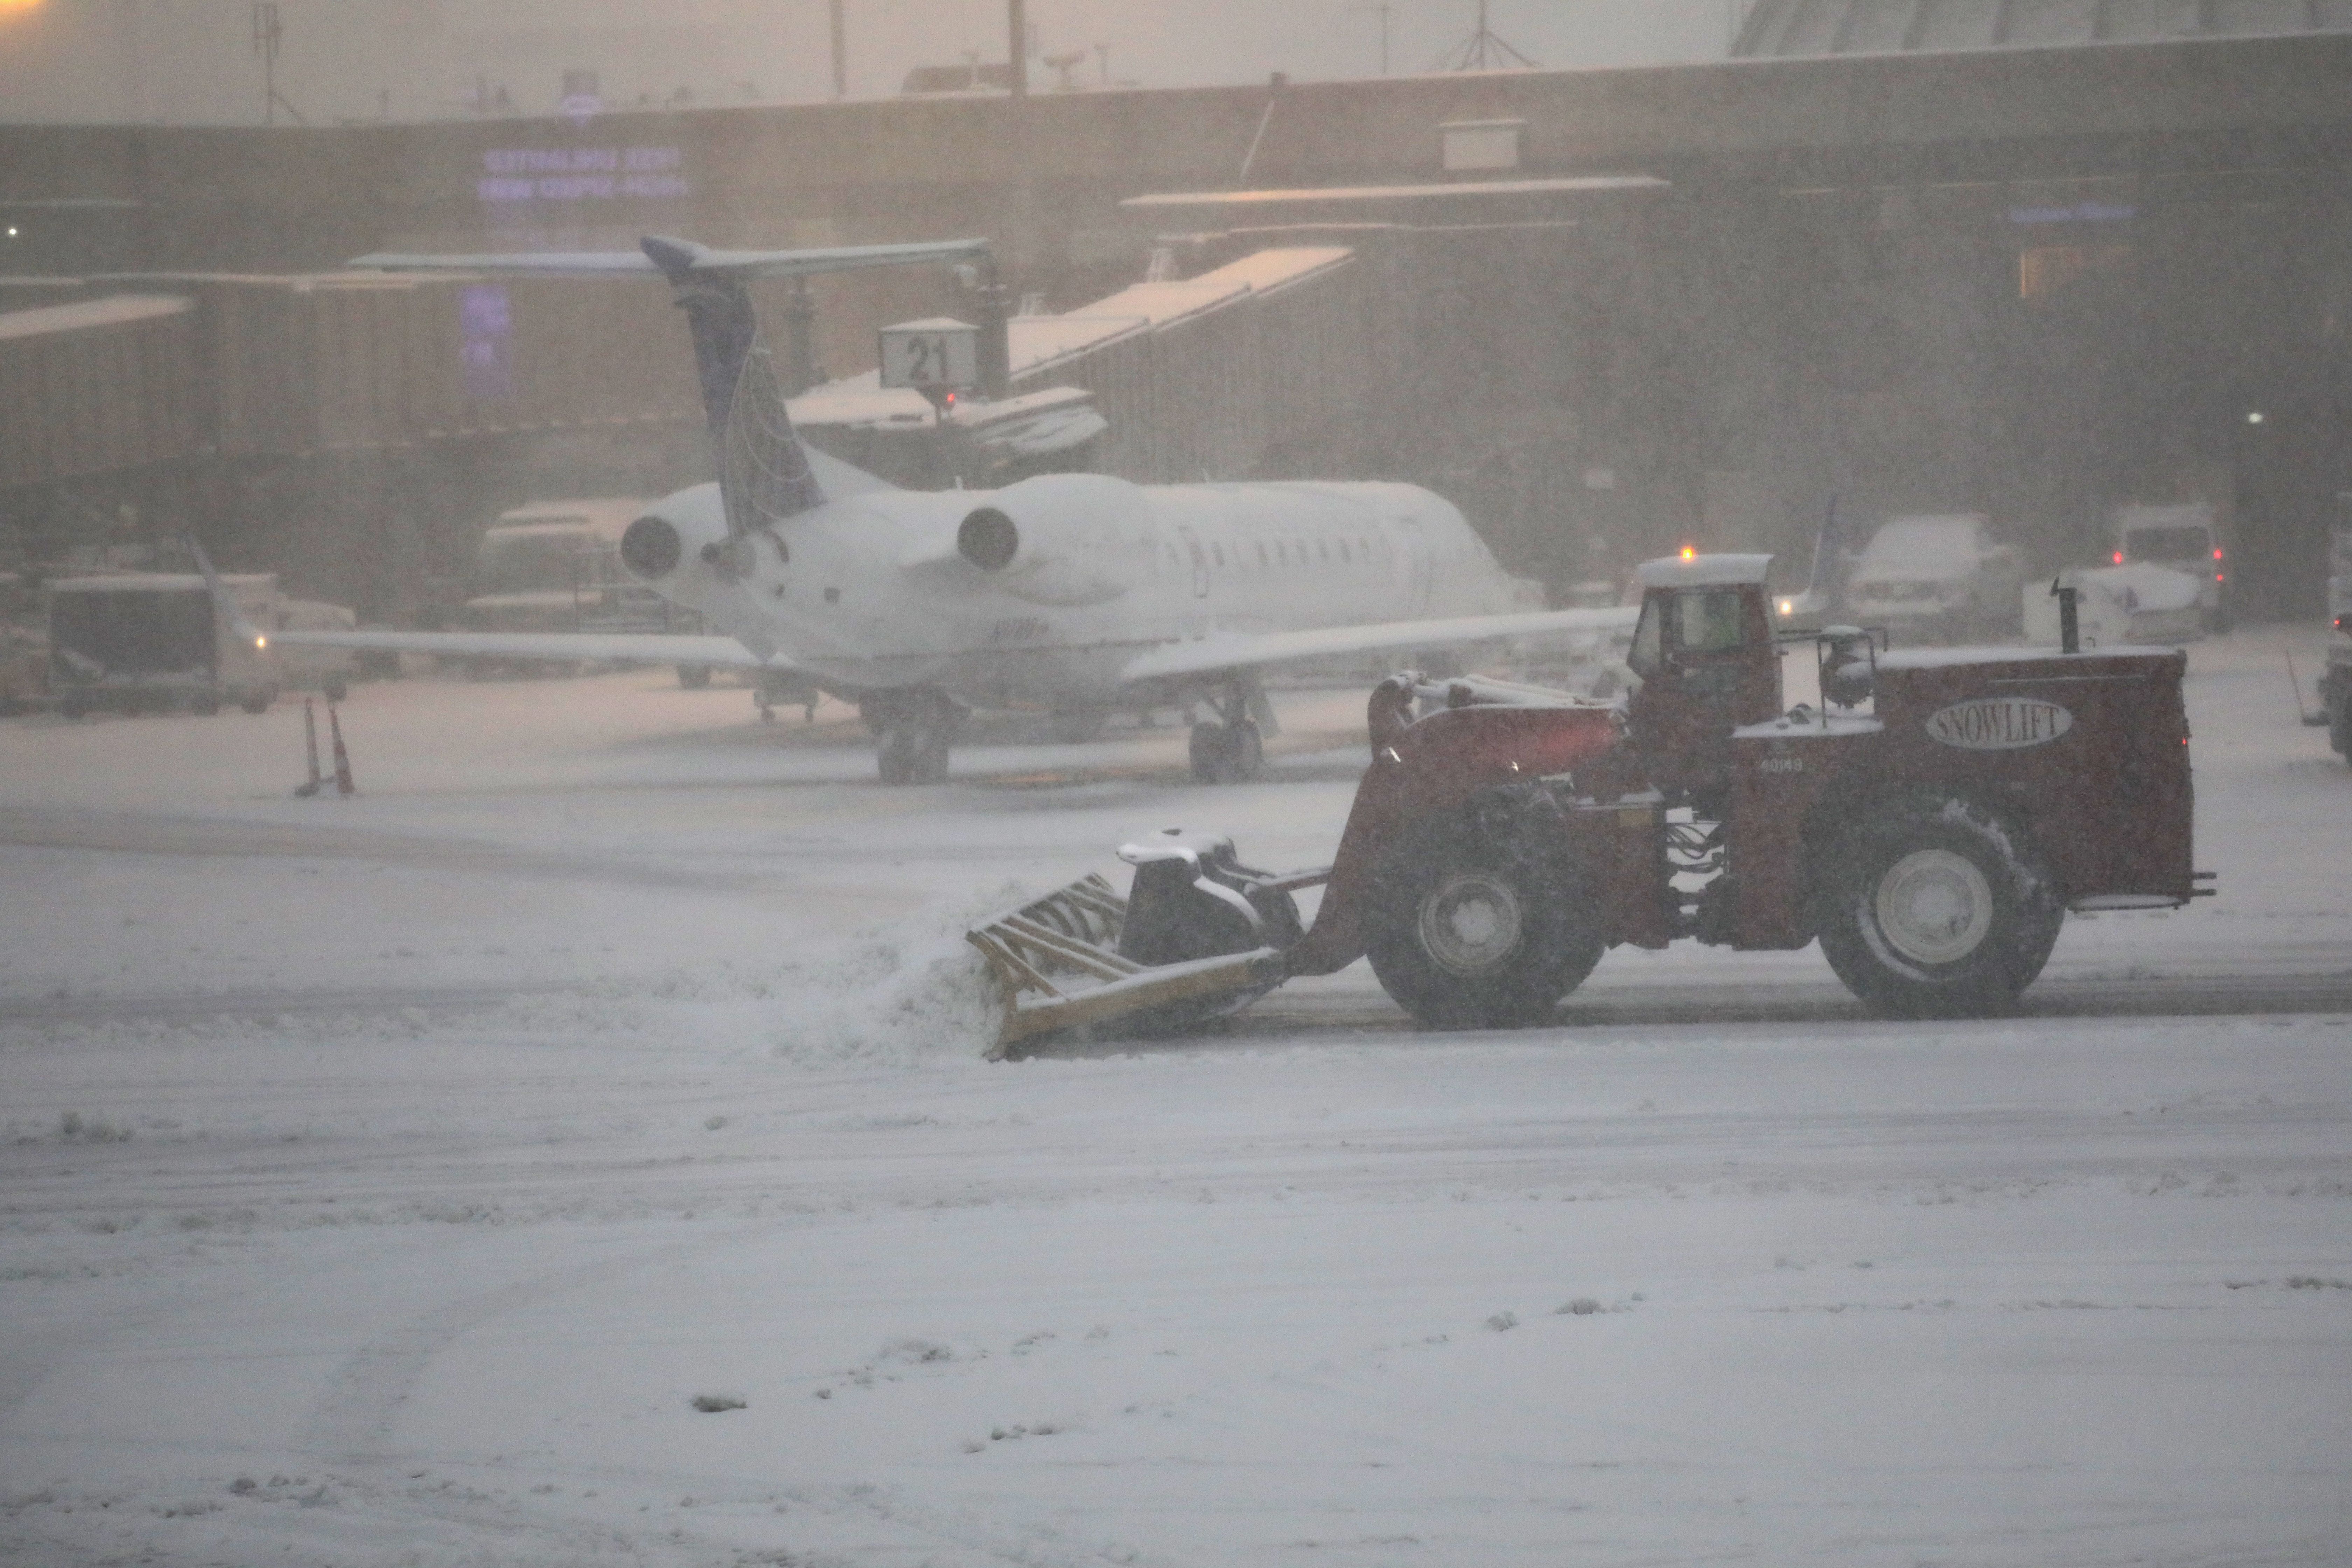 A plow clears snow during an early winter storm at the Newark Liberty International Airport on November 15, 2018 in Newark, New Jersey. The snow storm caused flight cancellations throughout the northeast. 